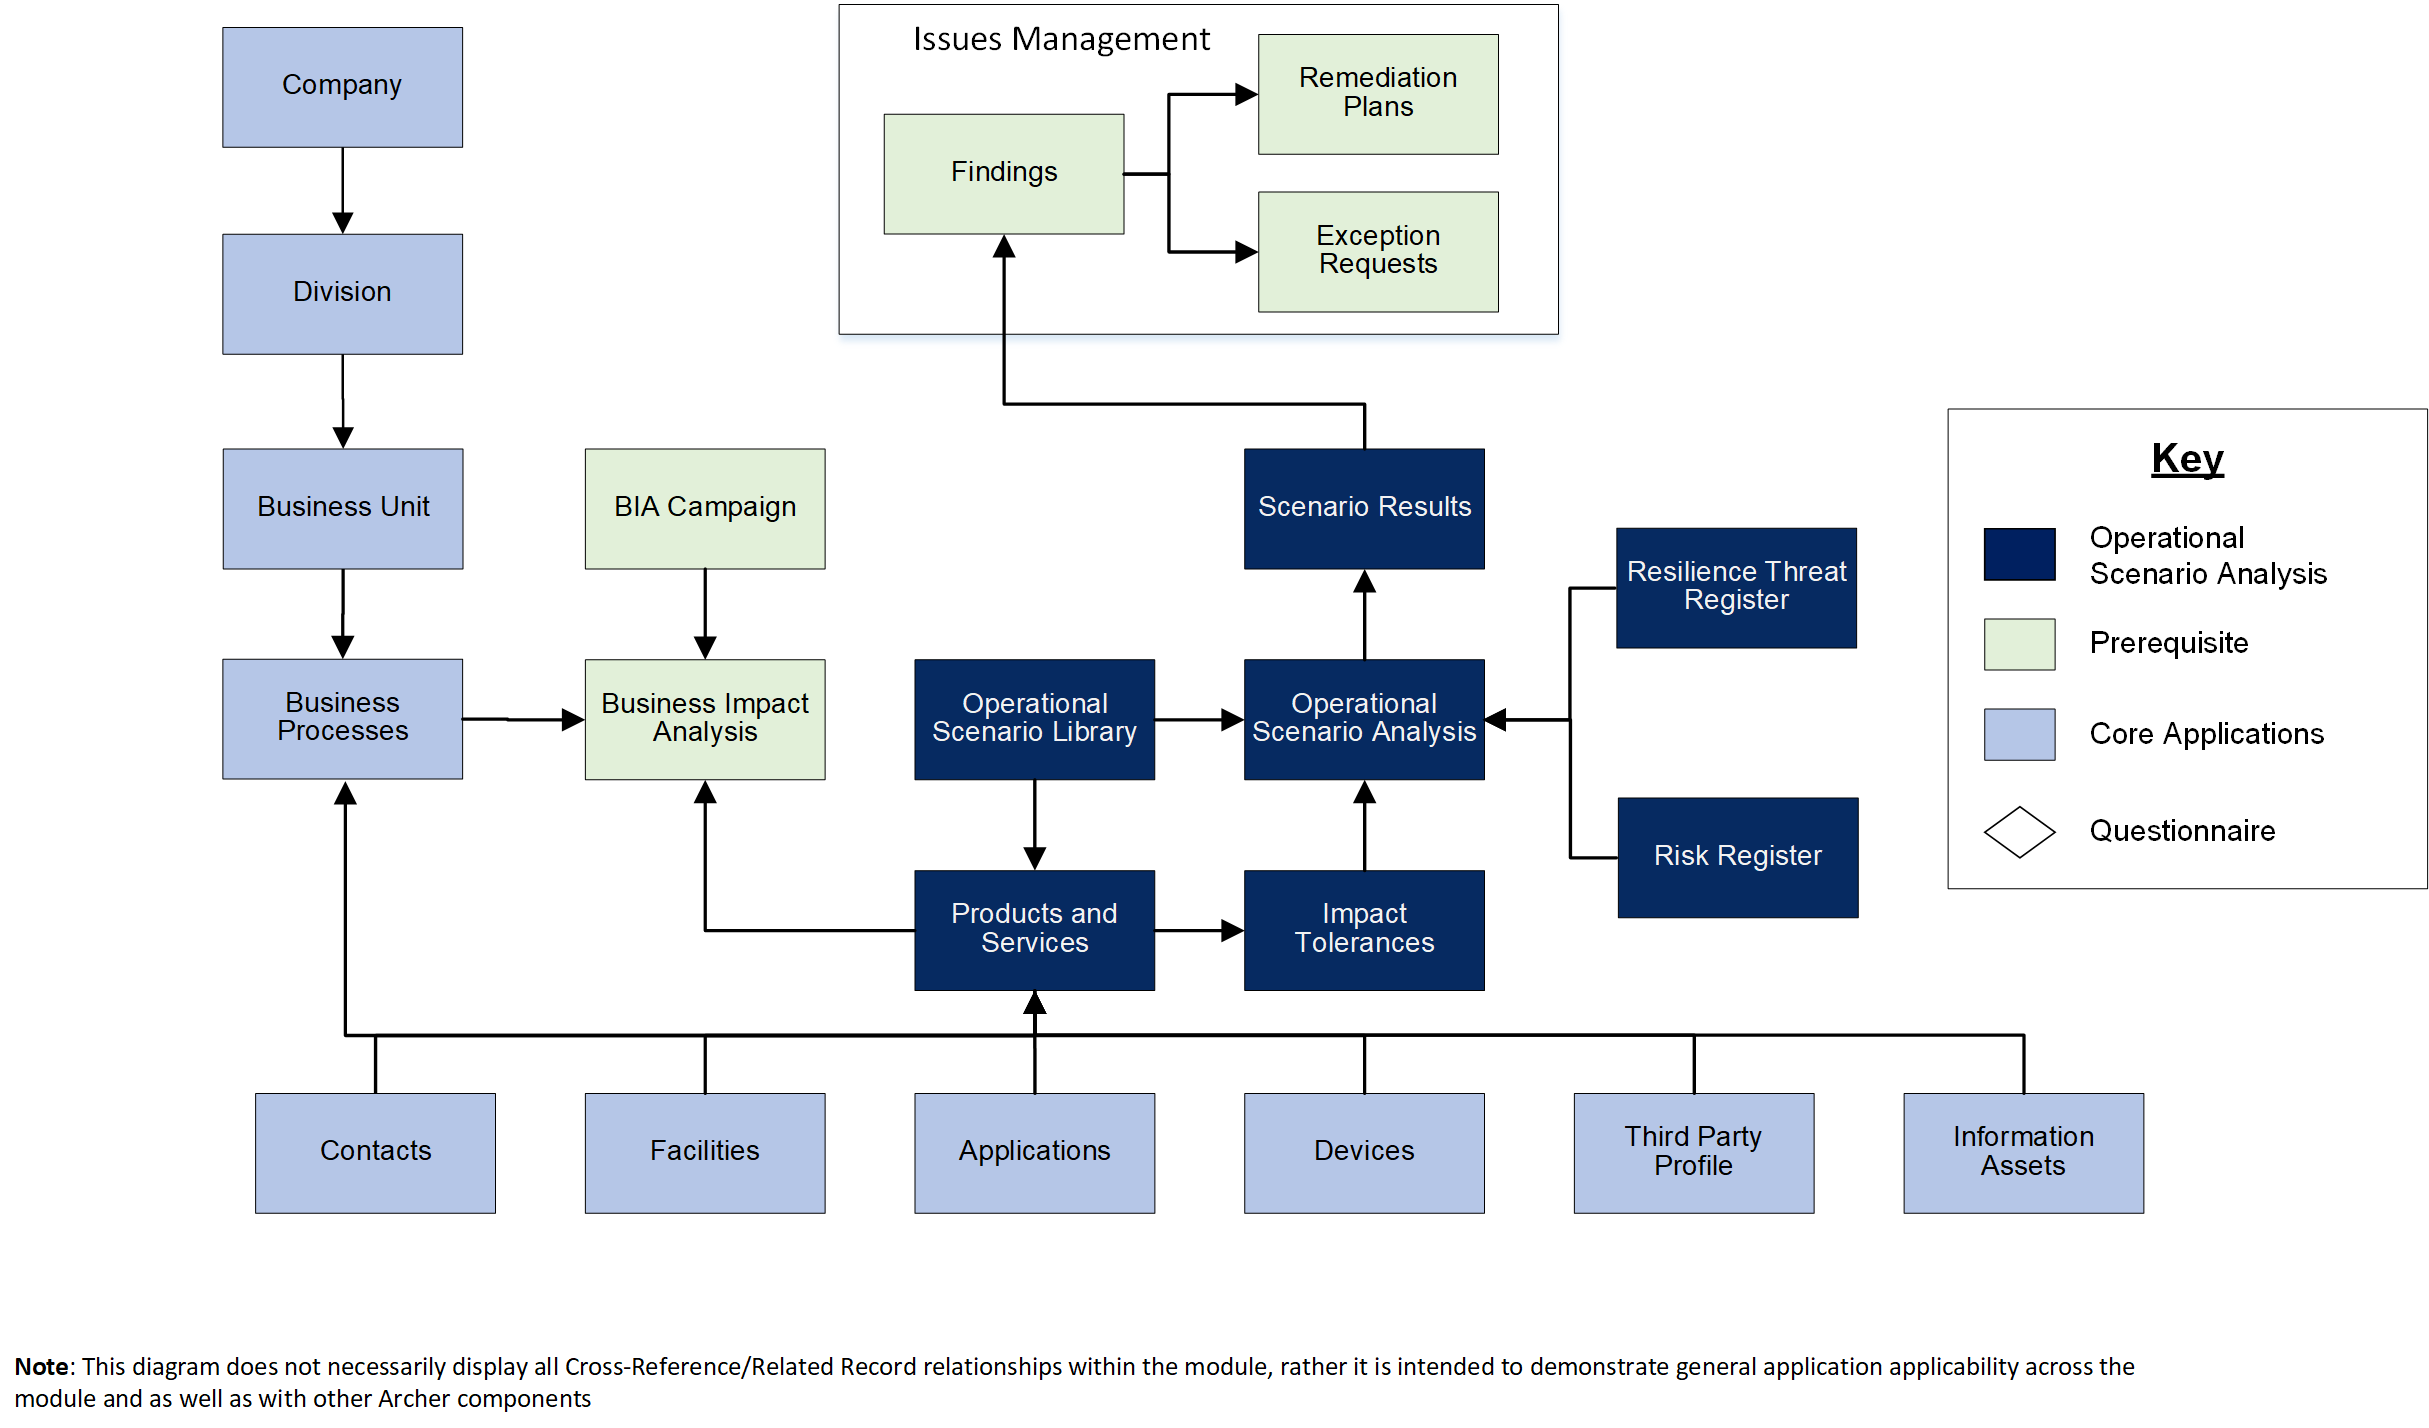 Relationships between the applications in the Operational Scenario Analysis use case